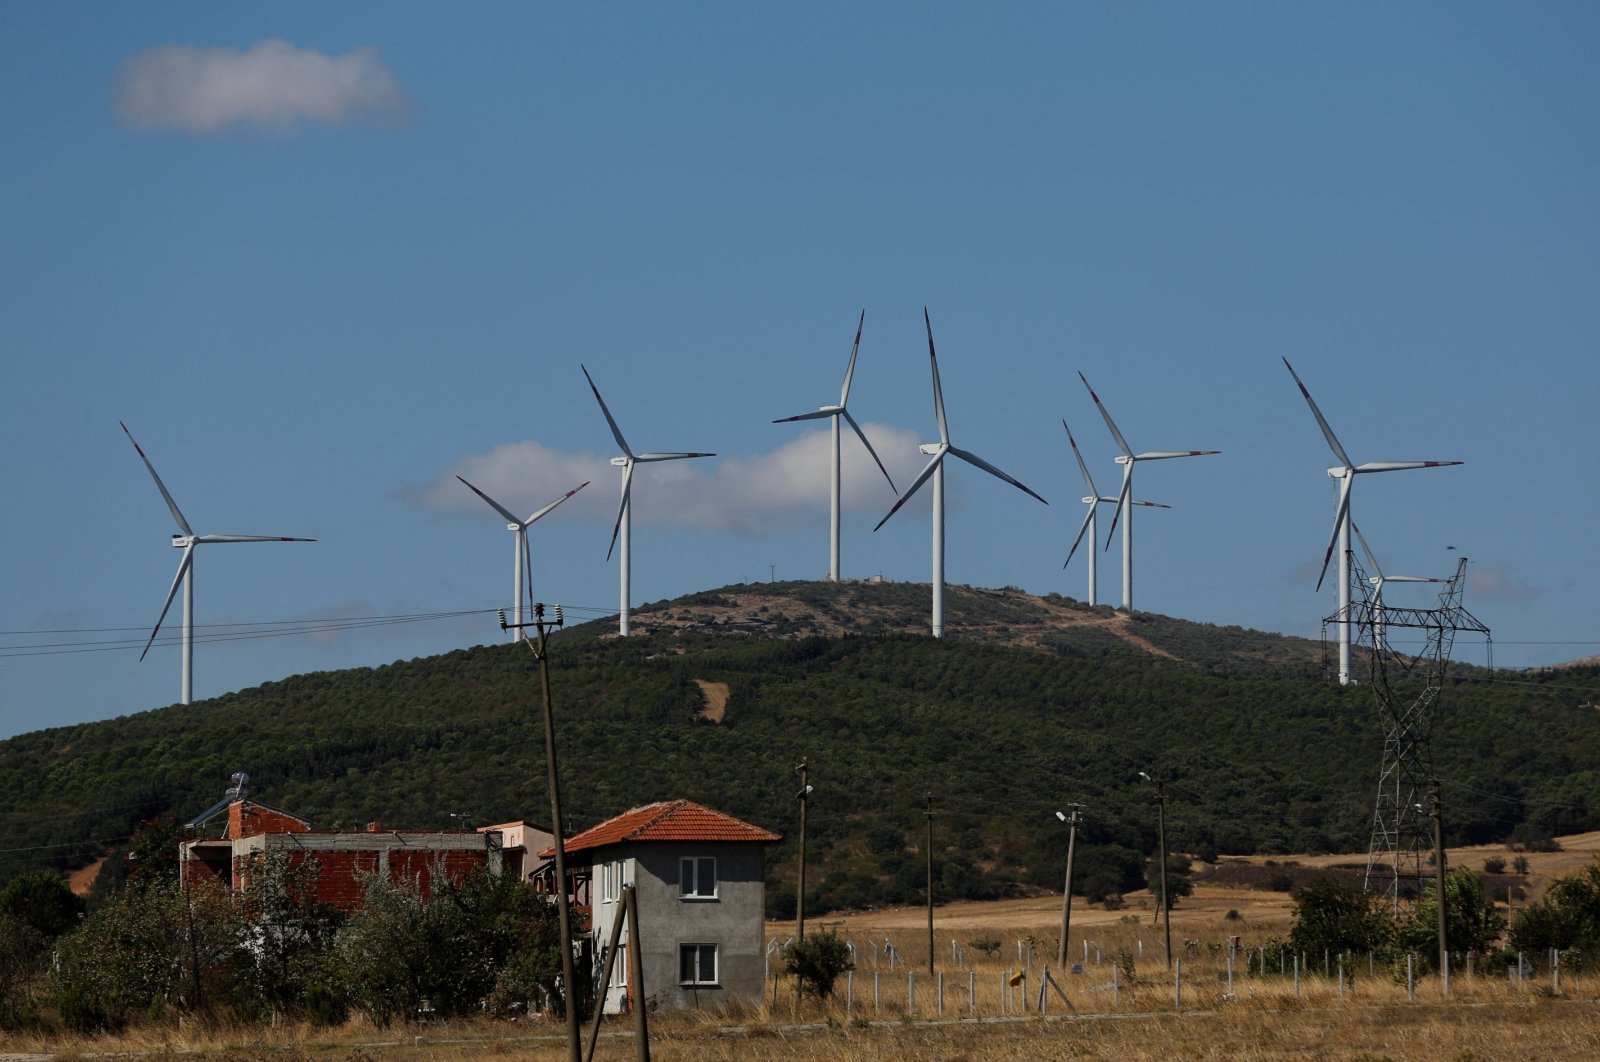 Wind turbines used to generate electricity are seen near the town of Susurluk in Balıkesir province, Turkey, Aug. 31, 2017. (Reuters Photo)
